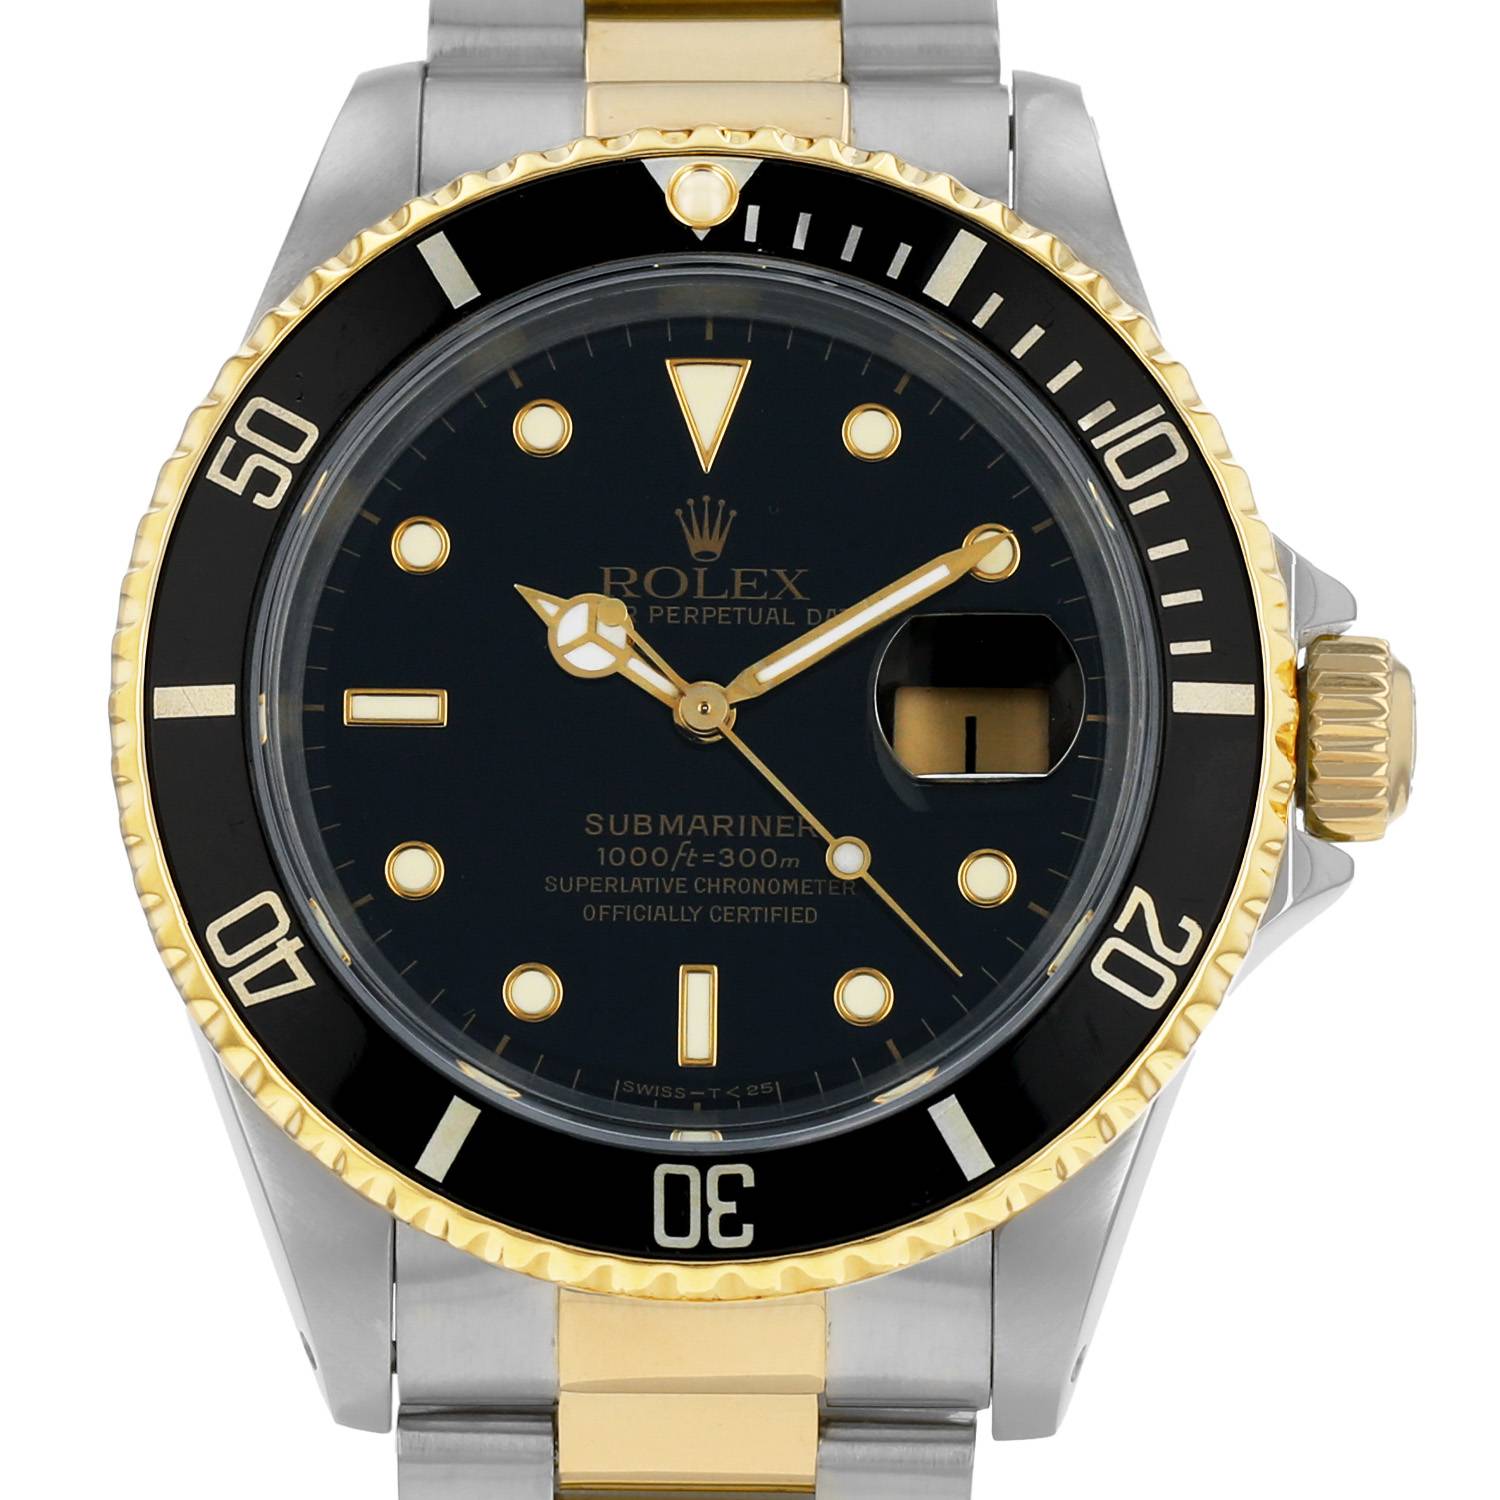 Submariner Date In And Stainless Steel Ref: 16613